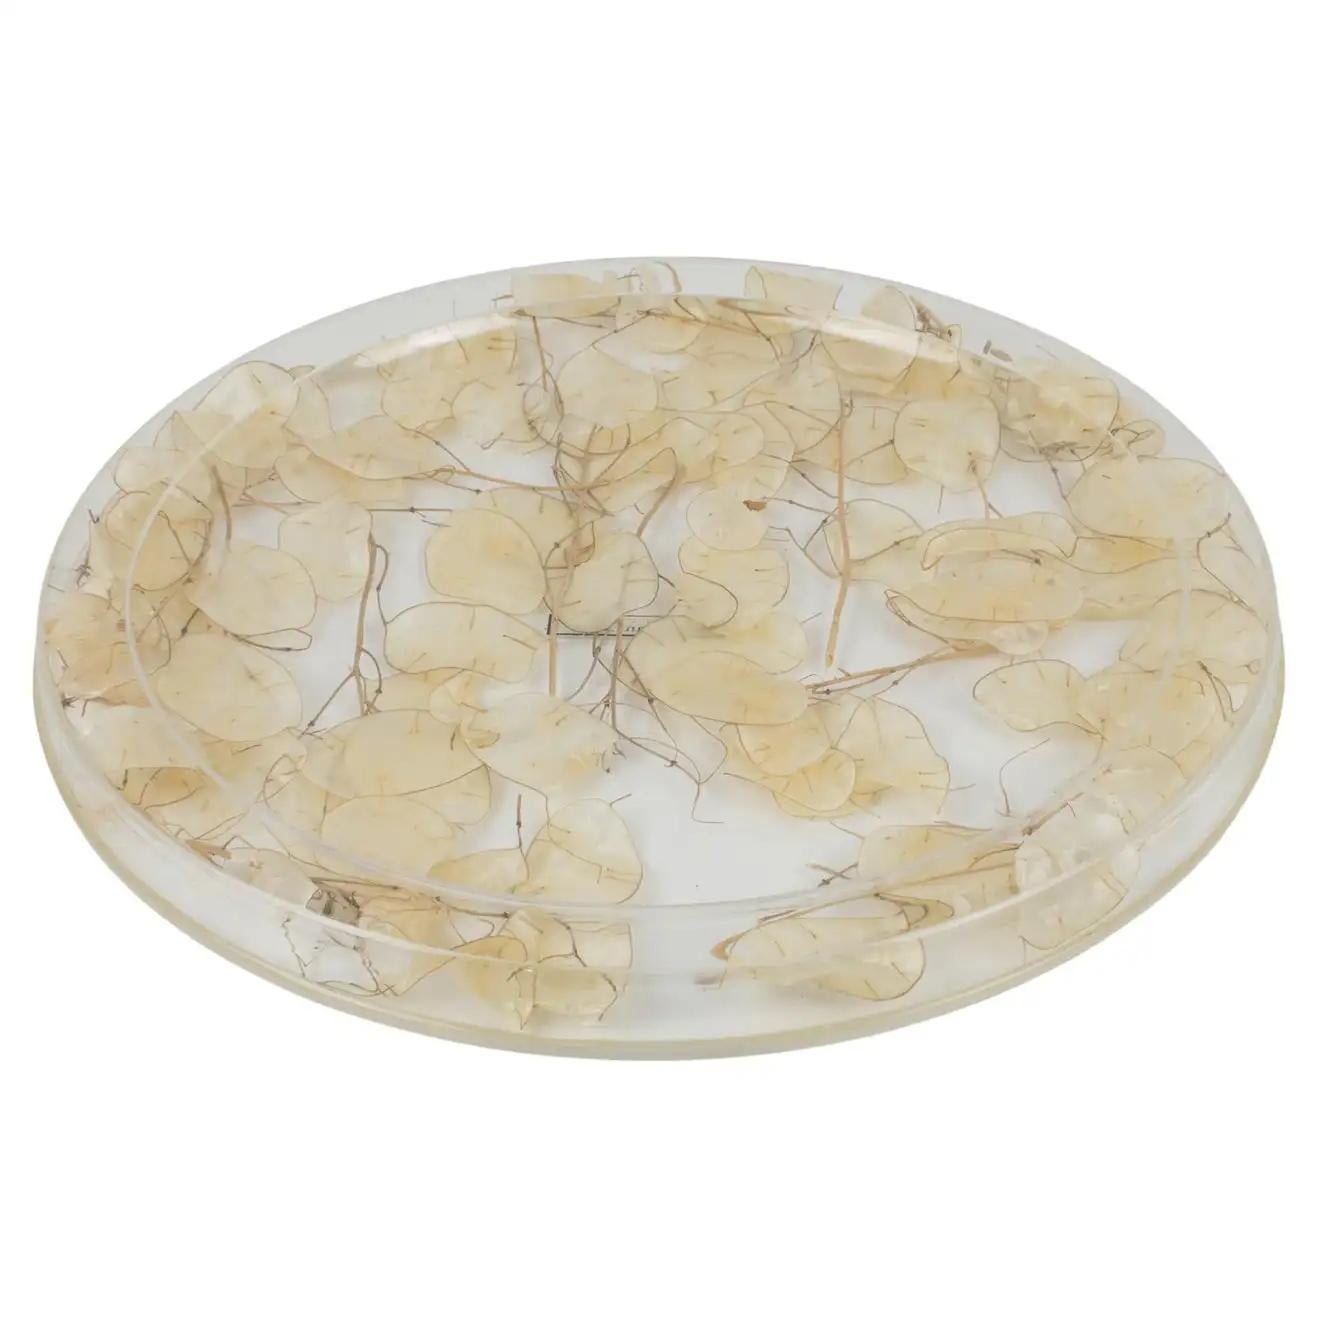 Christian Dior Home Collection Lucite-Tablettplatte mit Dried Lunaria (Acryl) im Angebot